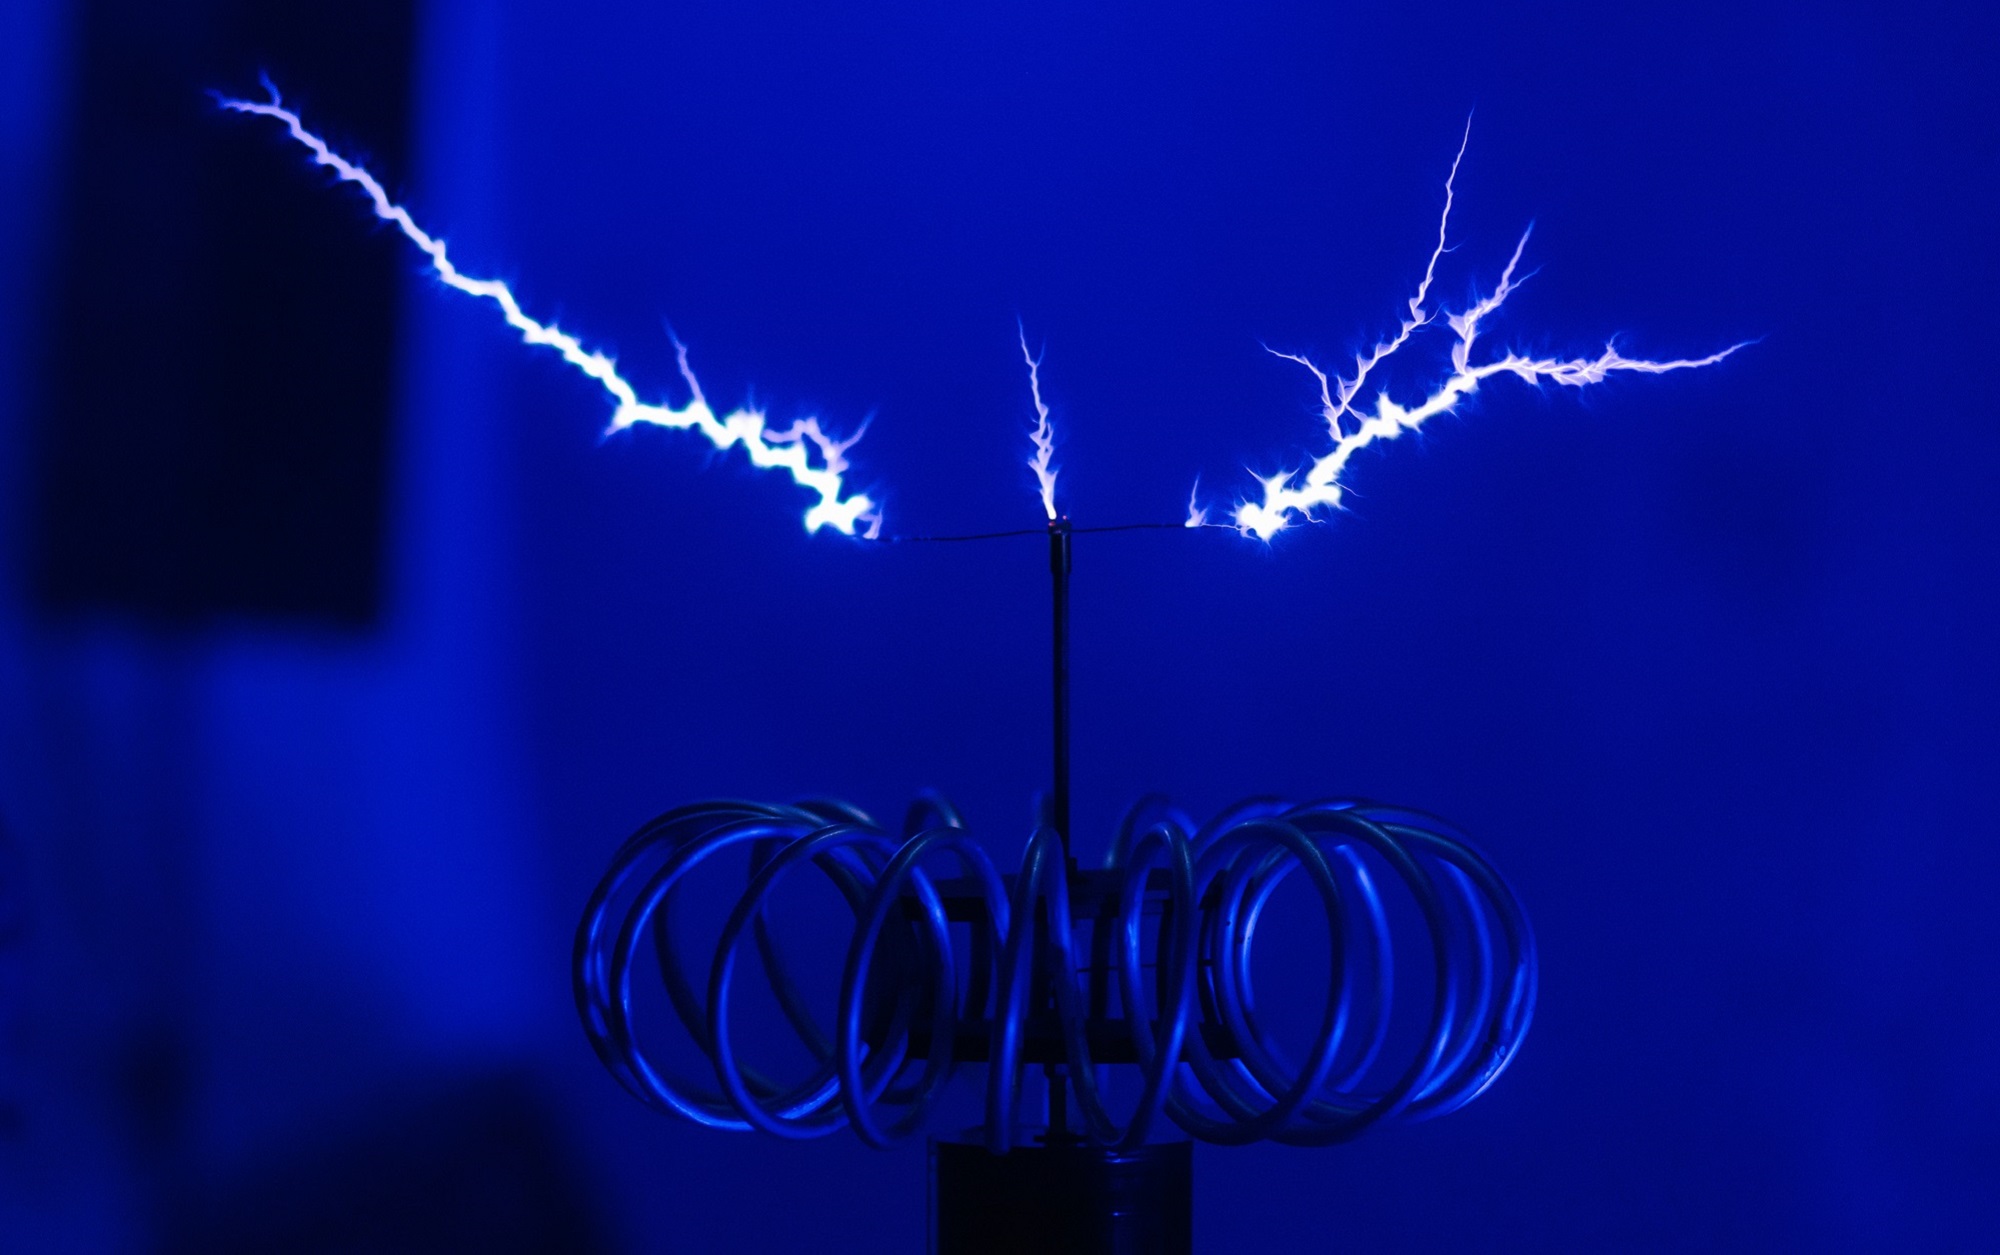 Tesla coil experiment to demonstrate how electricity works.